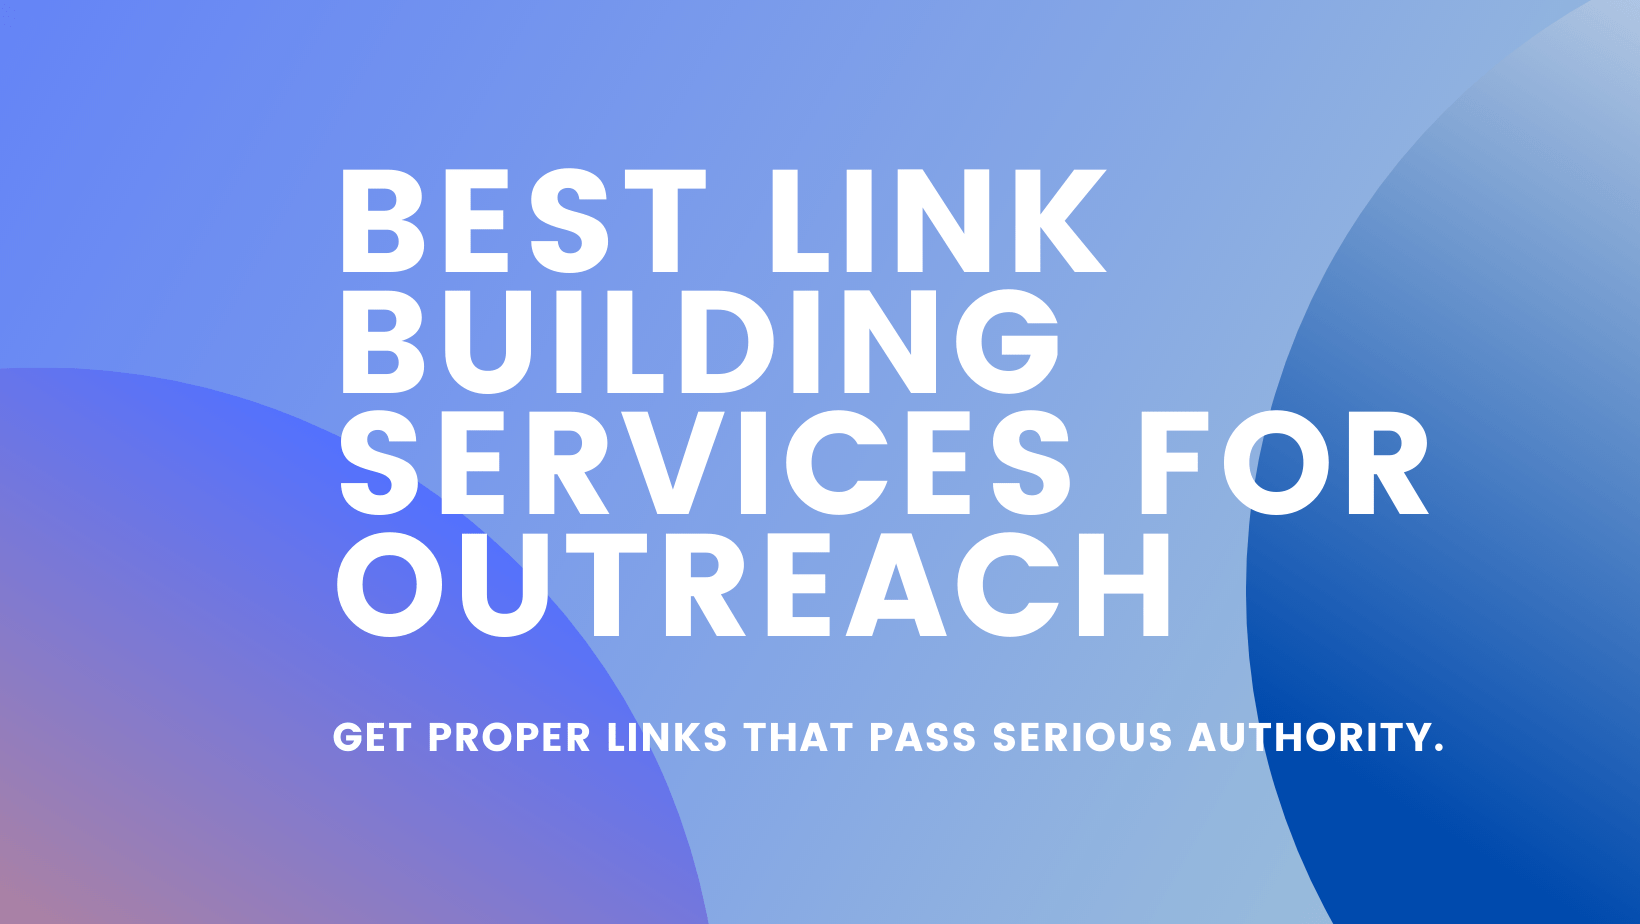 Best Link Building Services for Outreach